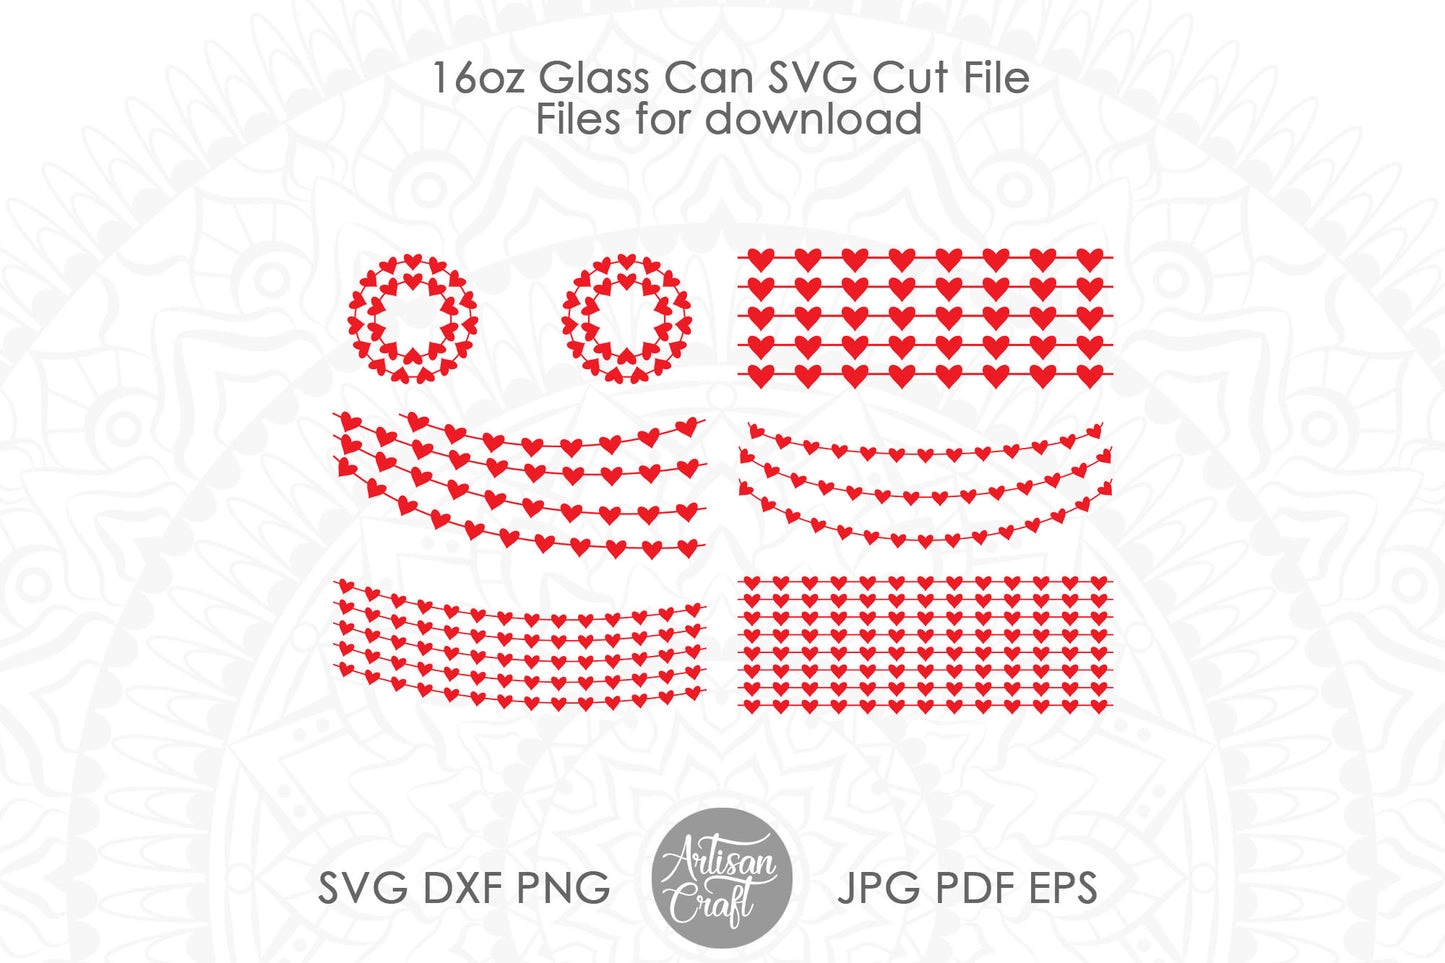 Can glass wrap SVG showing heart strings